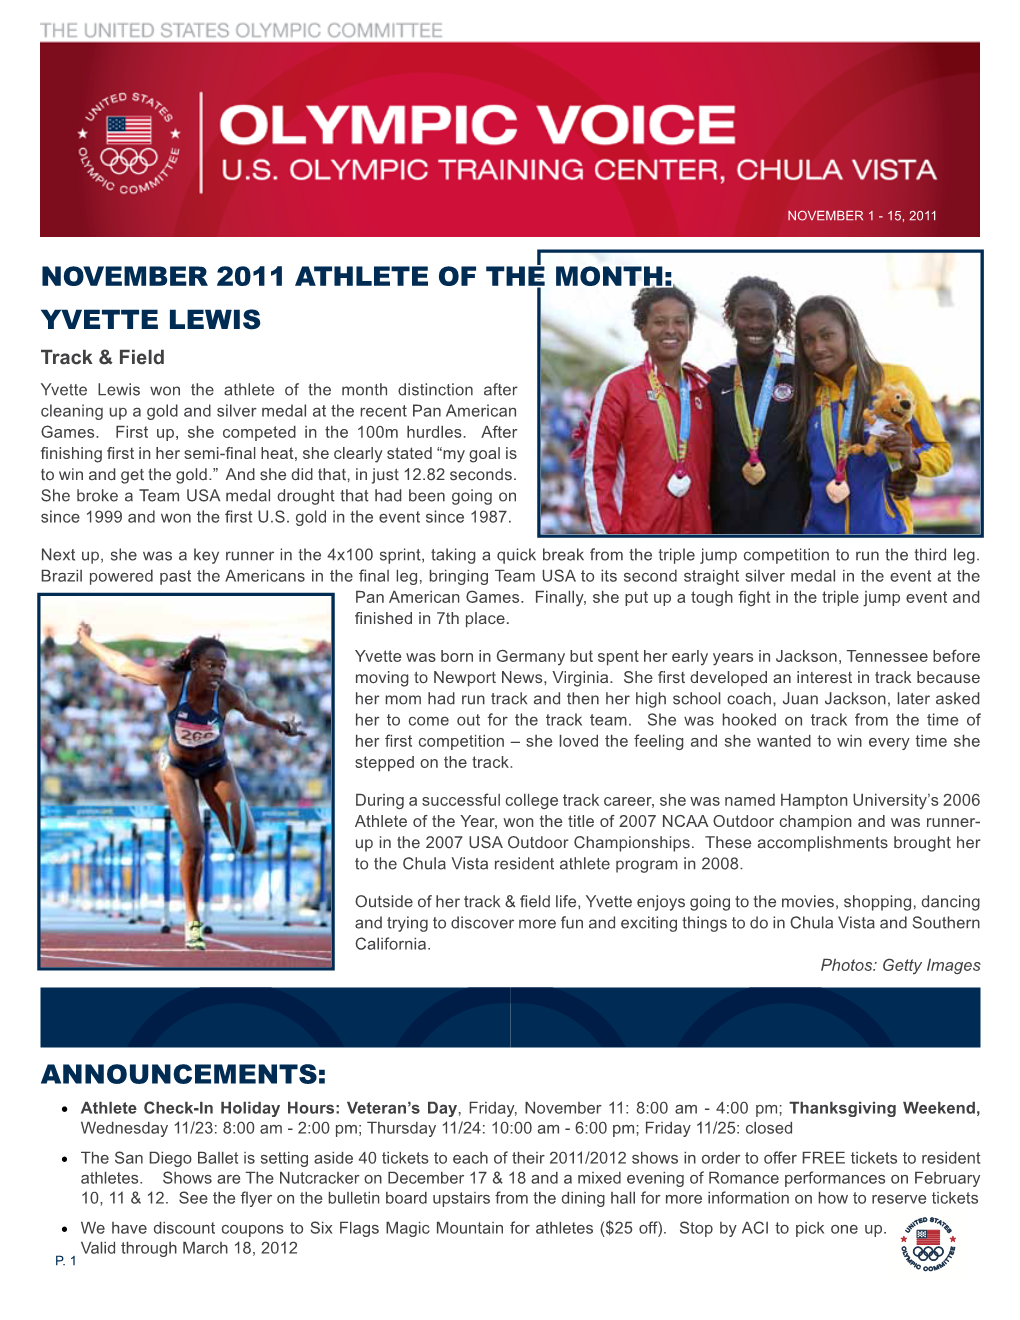 November 2011 Athlete of the Month: Yvette Lewis Announcements